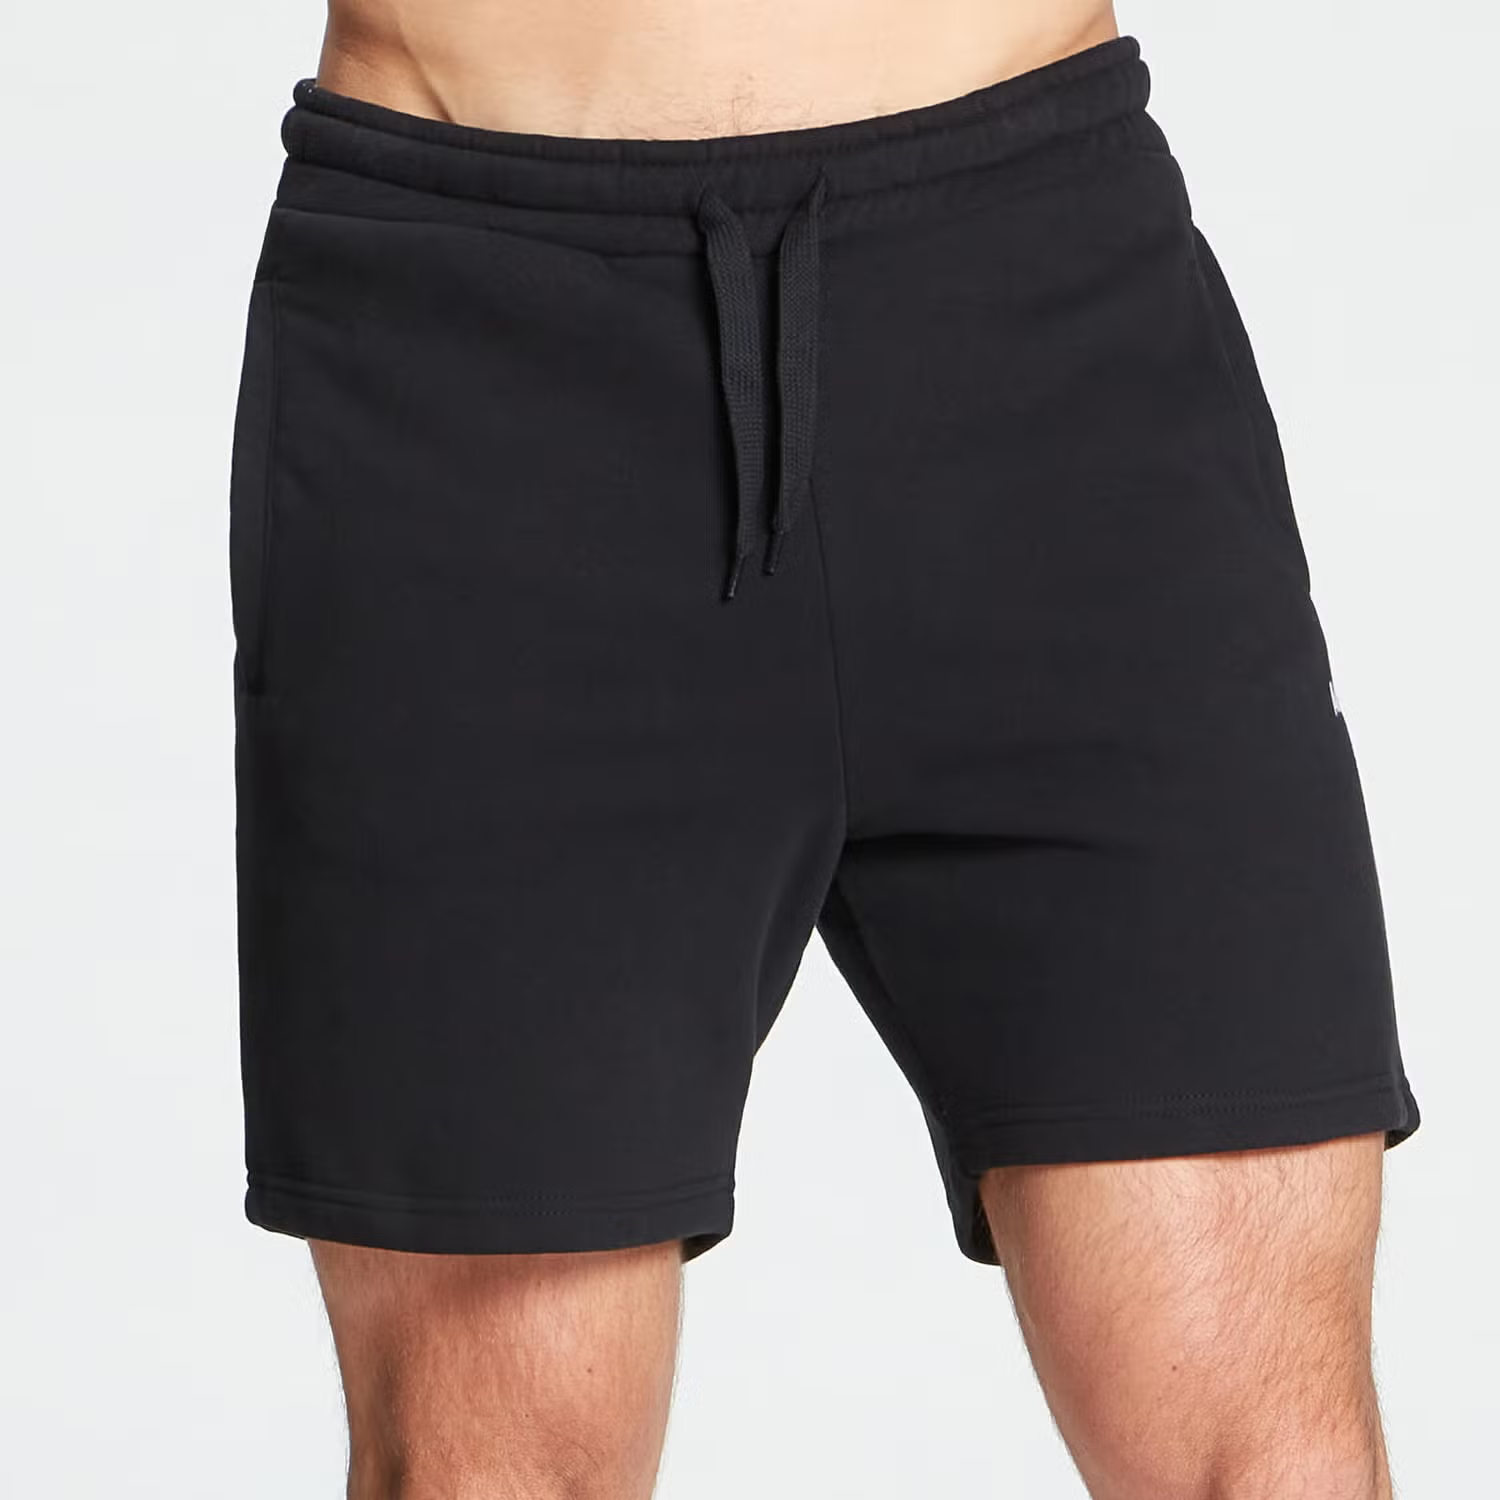 Men’s sweat shorts – How to Pick the Right One插图4